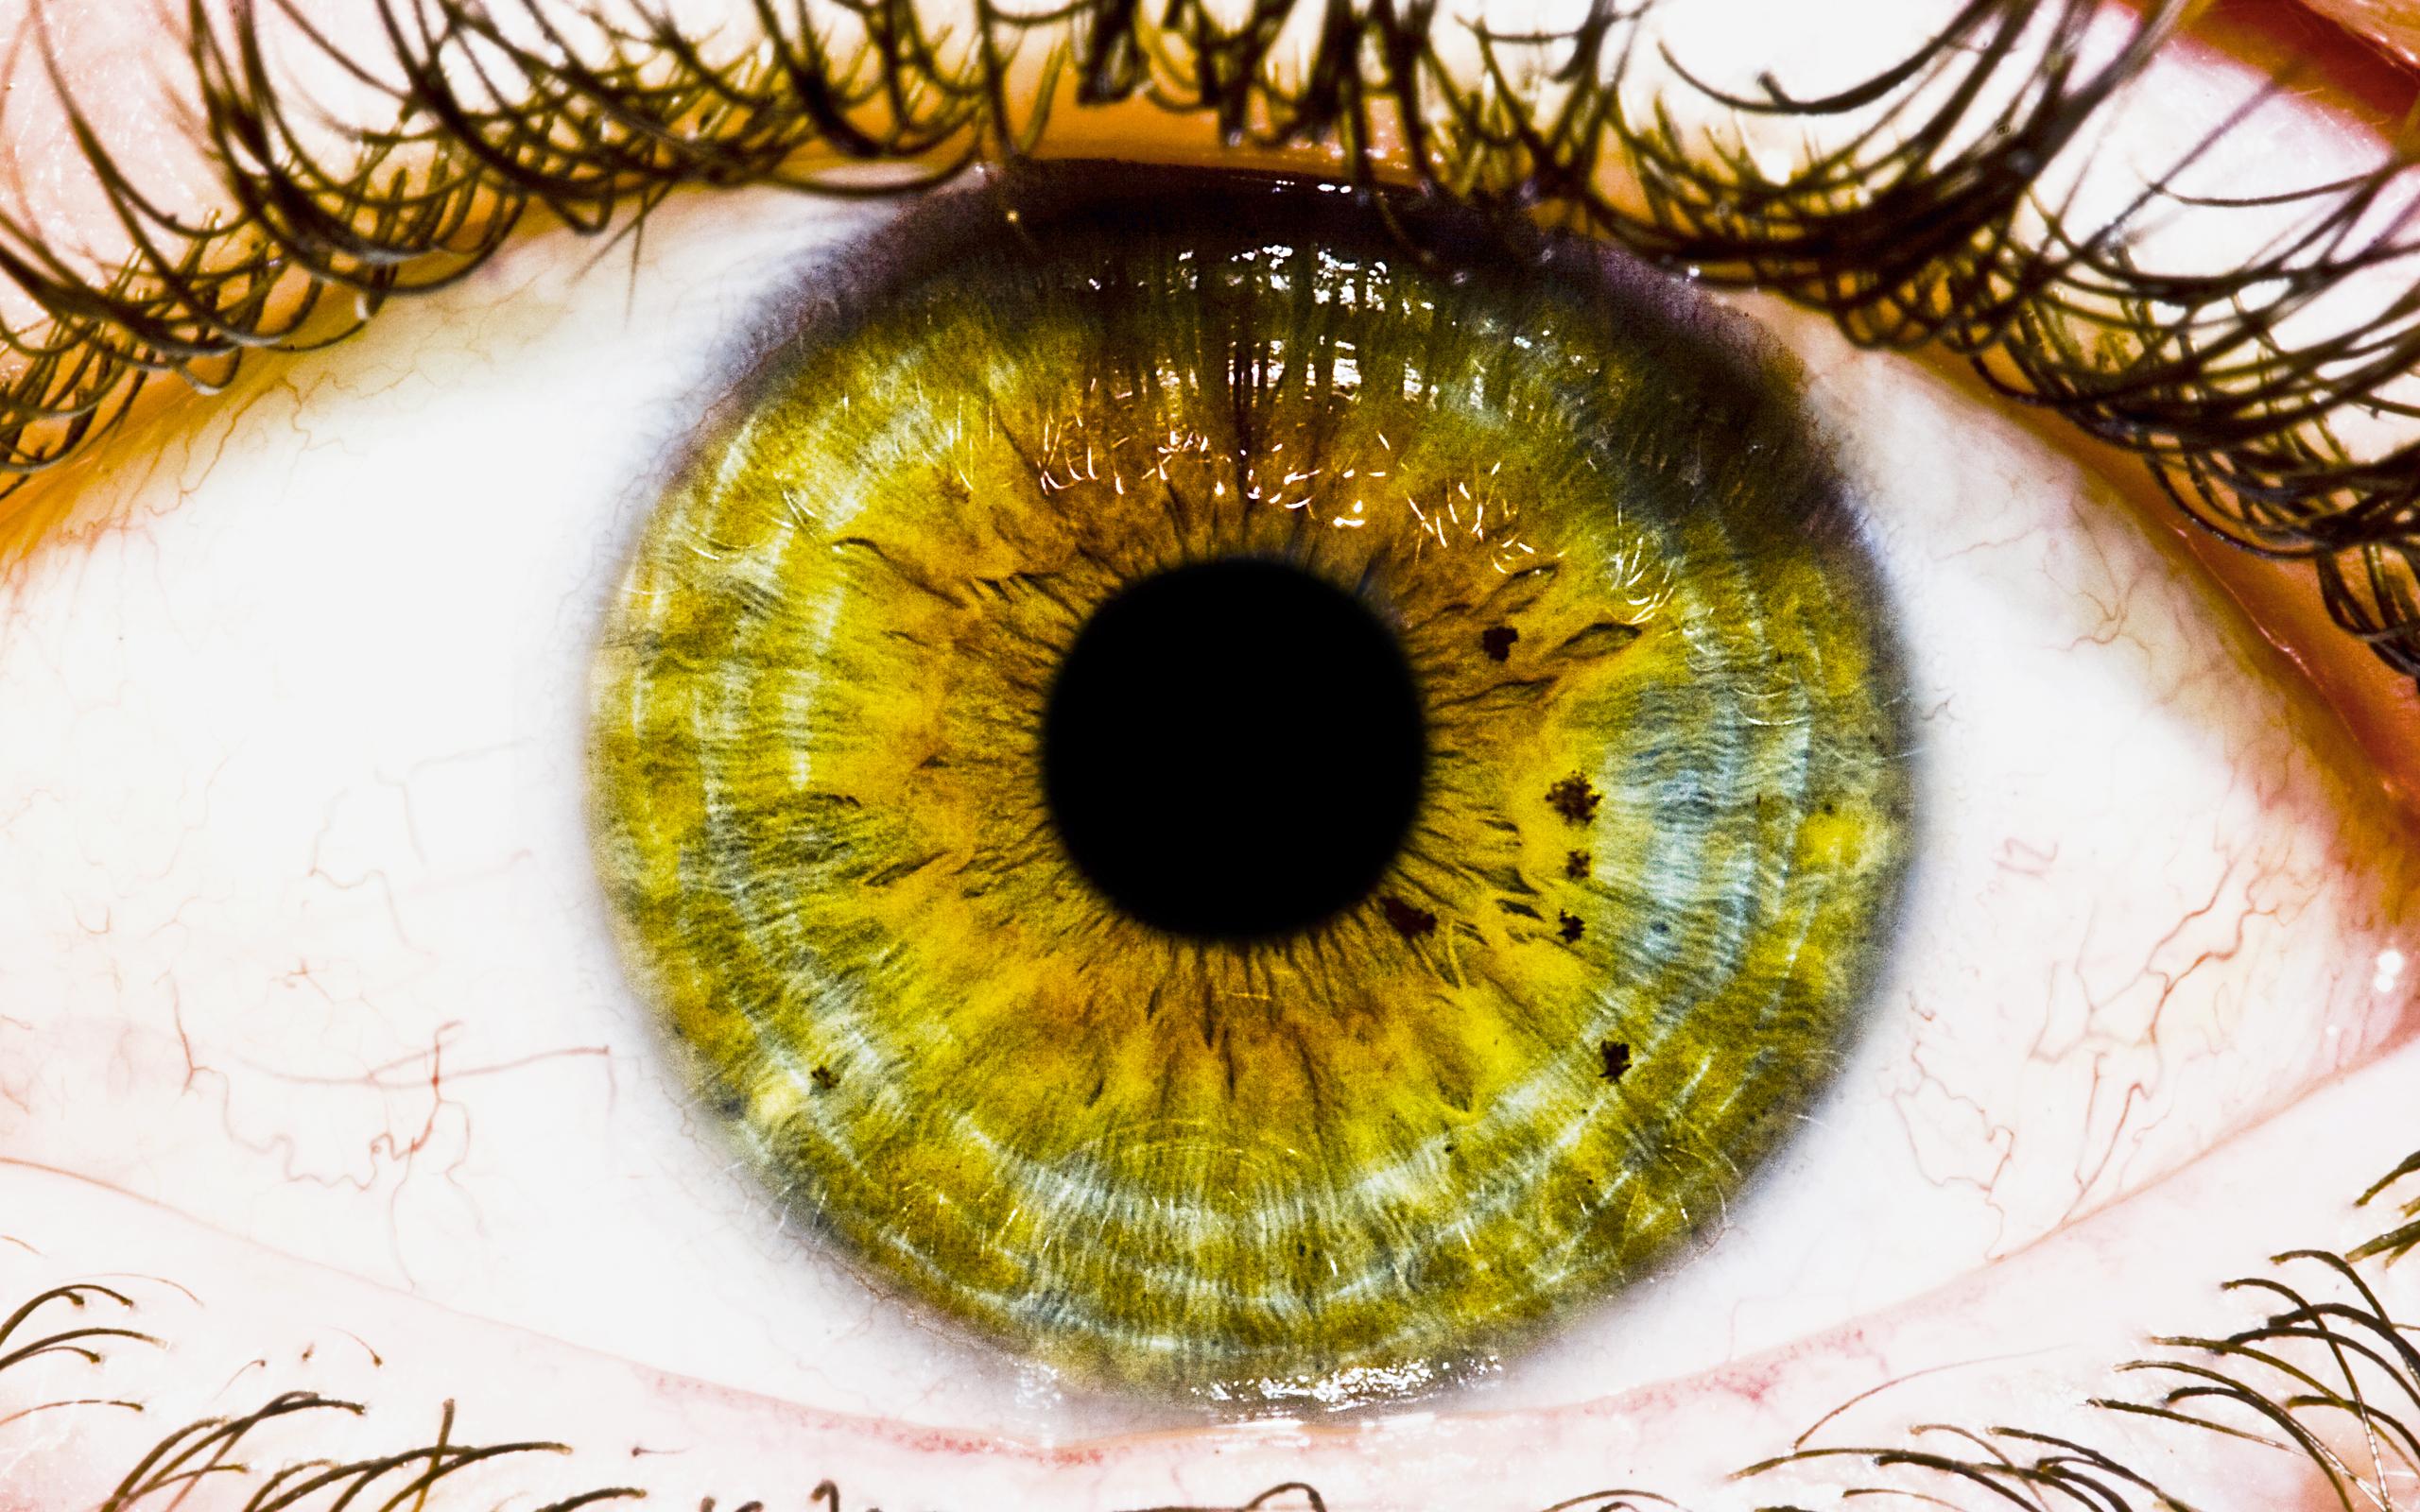 Download wallpaper for 2560x1440 resolution | The Eye | other ...